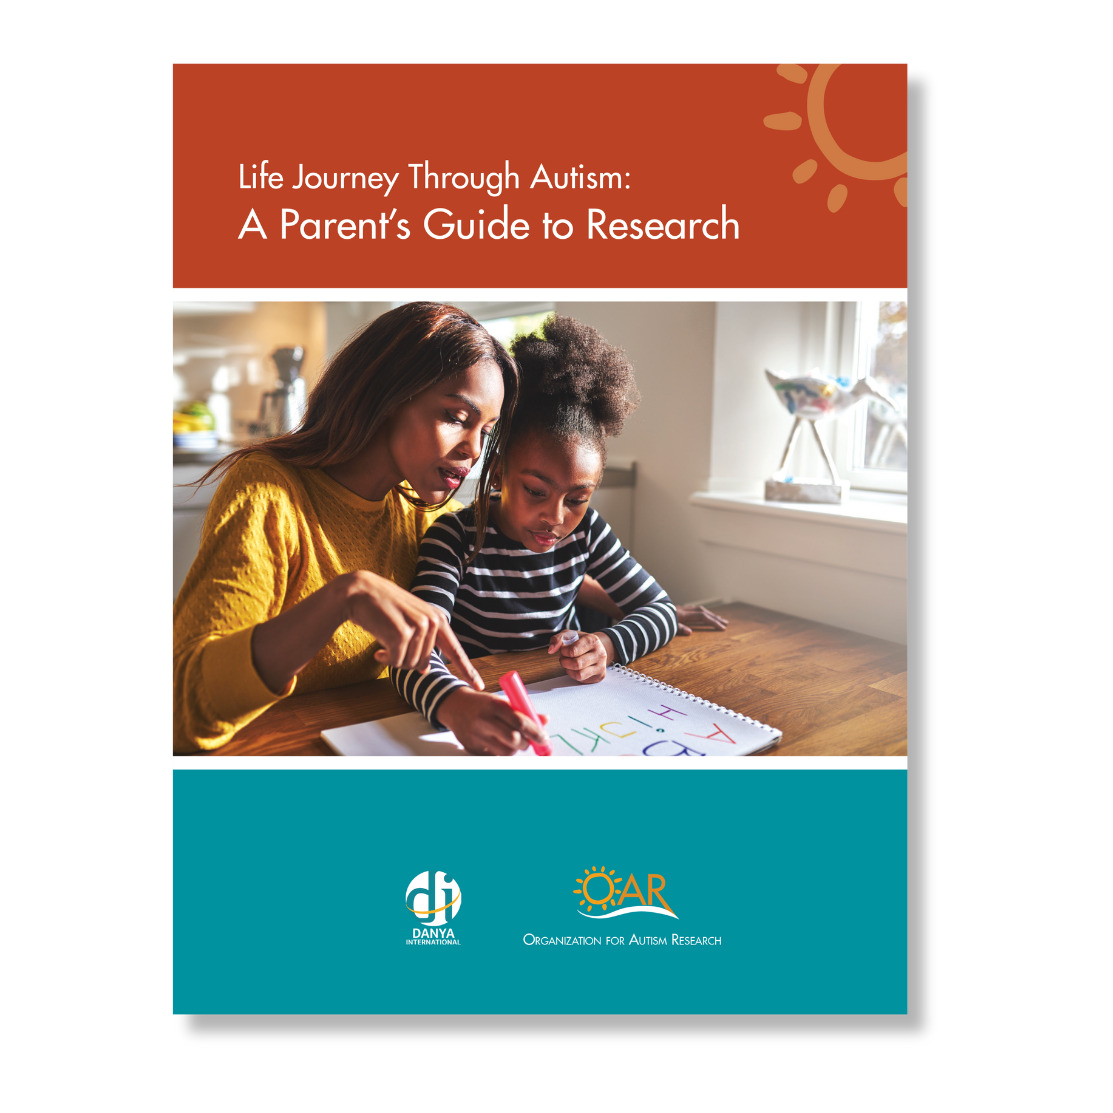 A Parent’s Guide to Research Organization for Autism Research